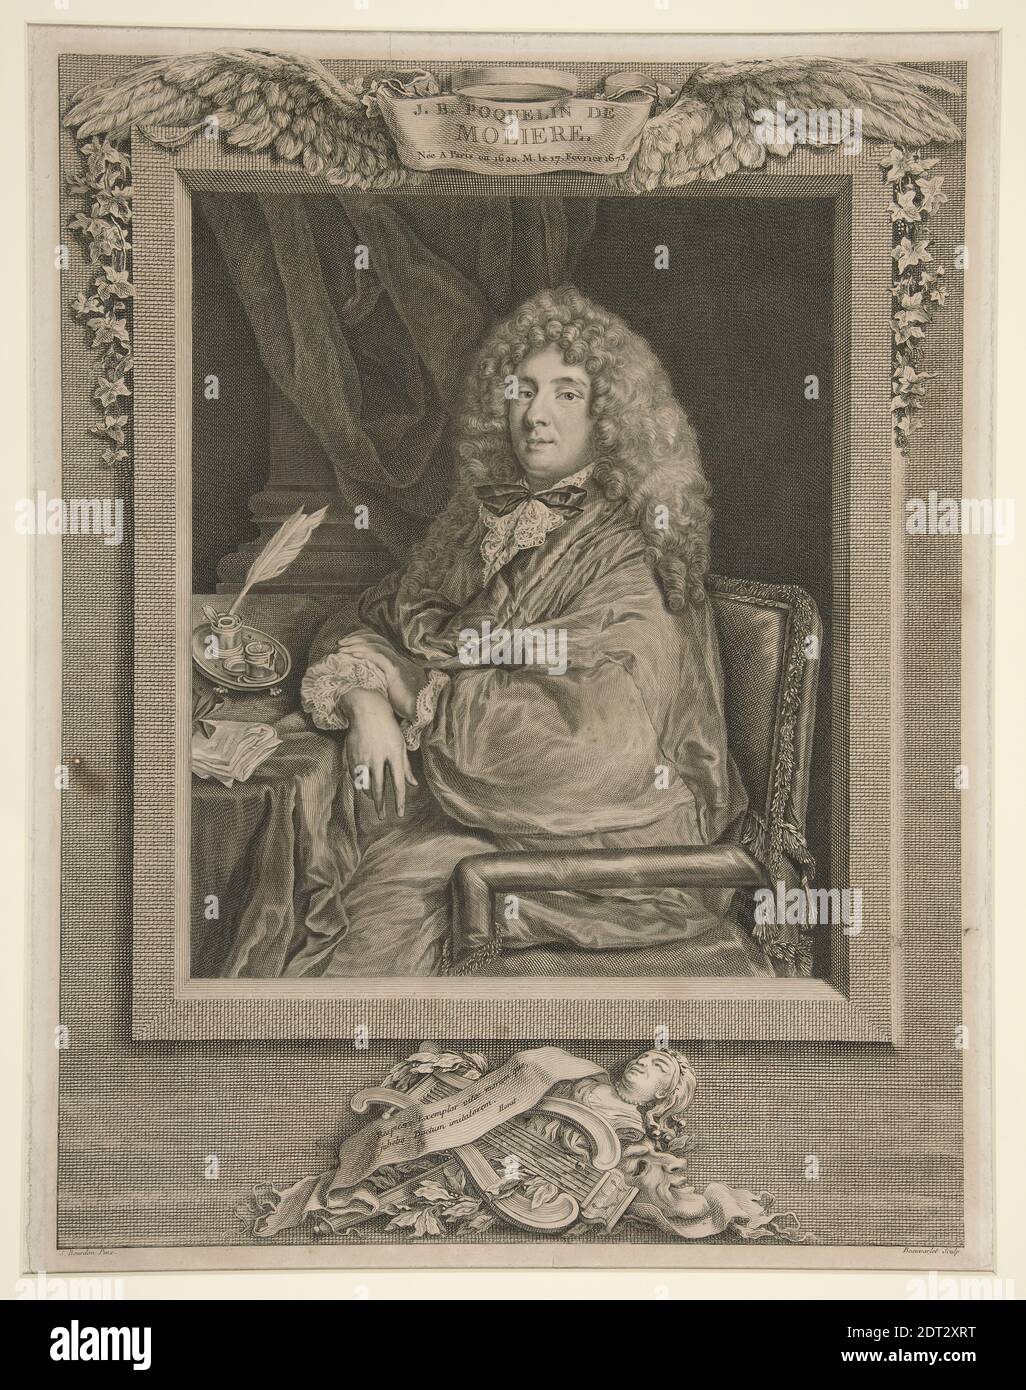 Artist: Jacques Firmin Beauvarlet, French, 1731–1797, After: Sébastien Bourdon, French, 1616–1671, Portrait of Molière, printed 1773, Engraving, Made in France, French, 18th century, Works on Paper - Prints Stock Photo